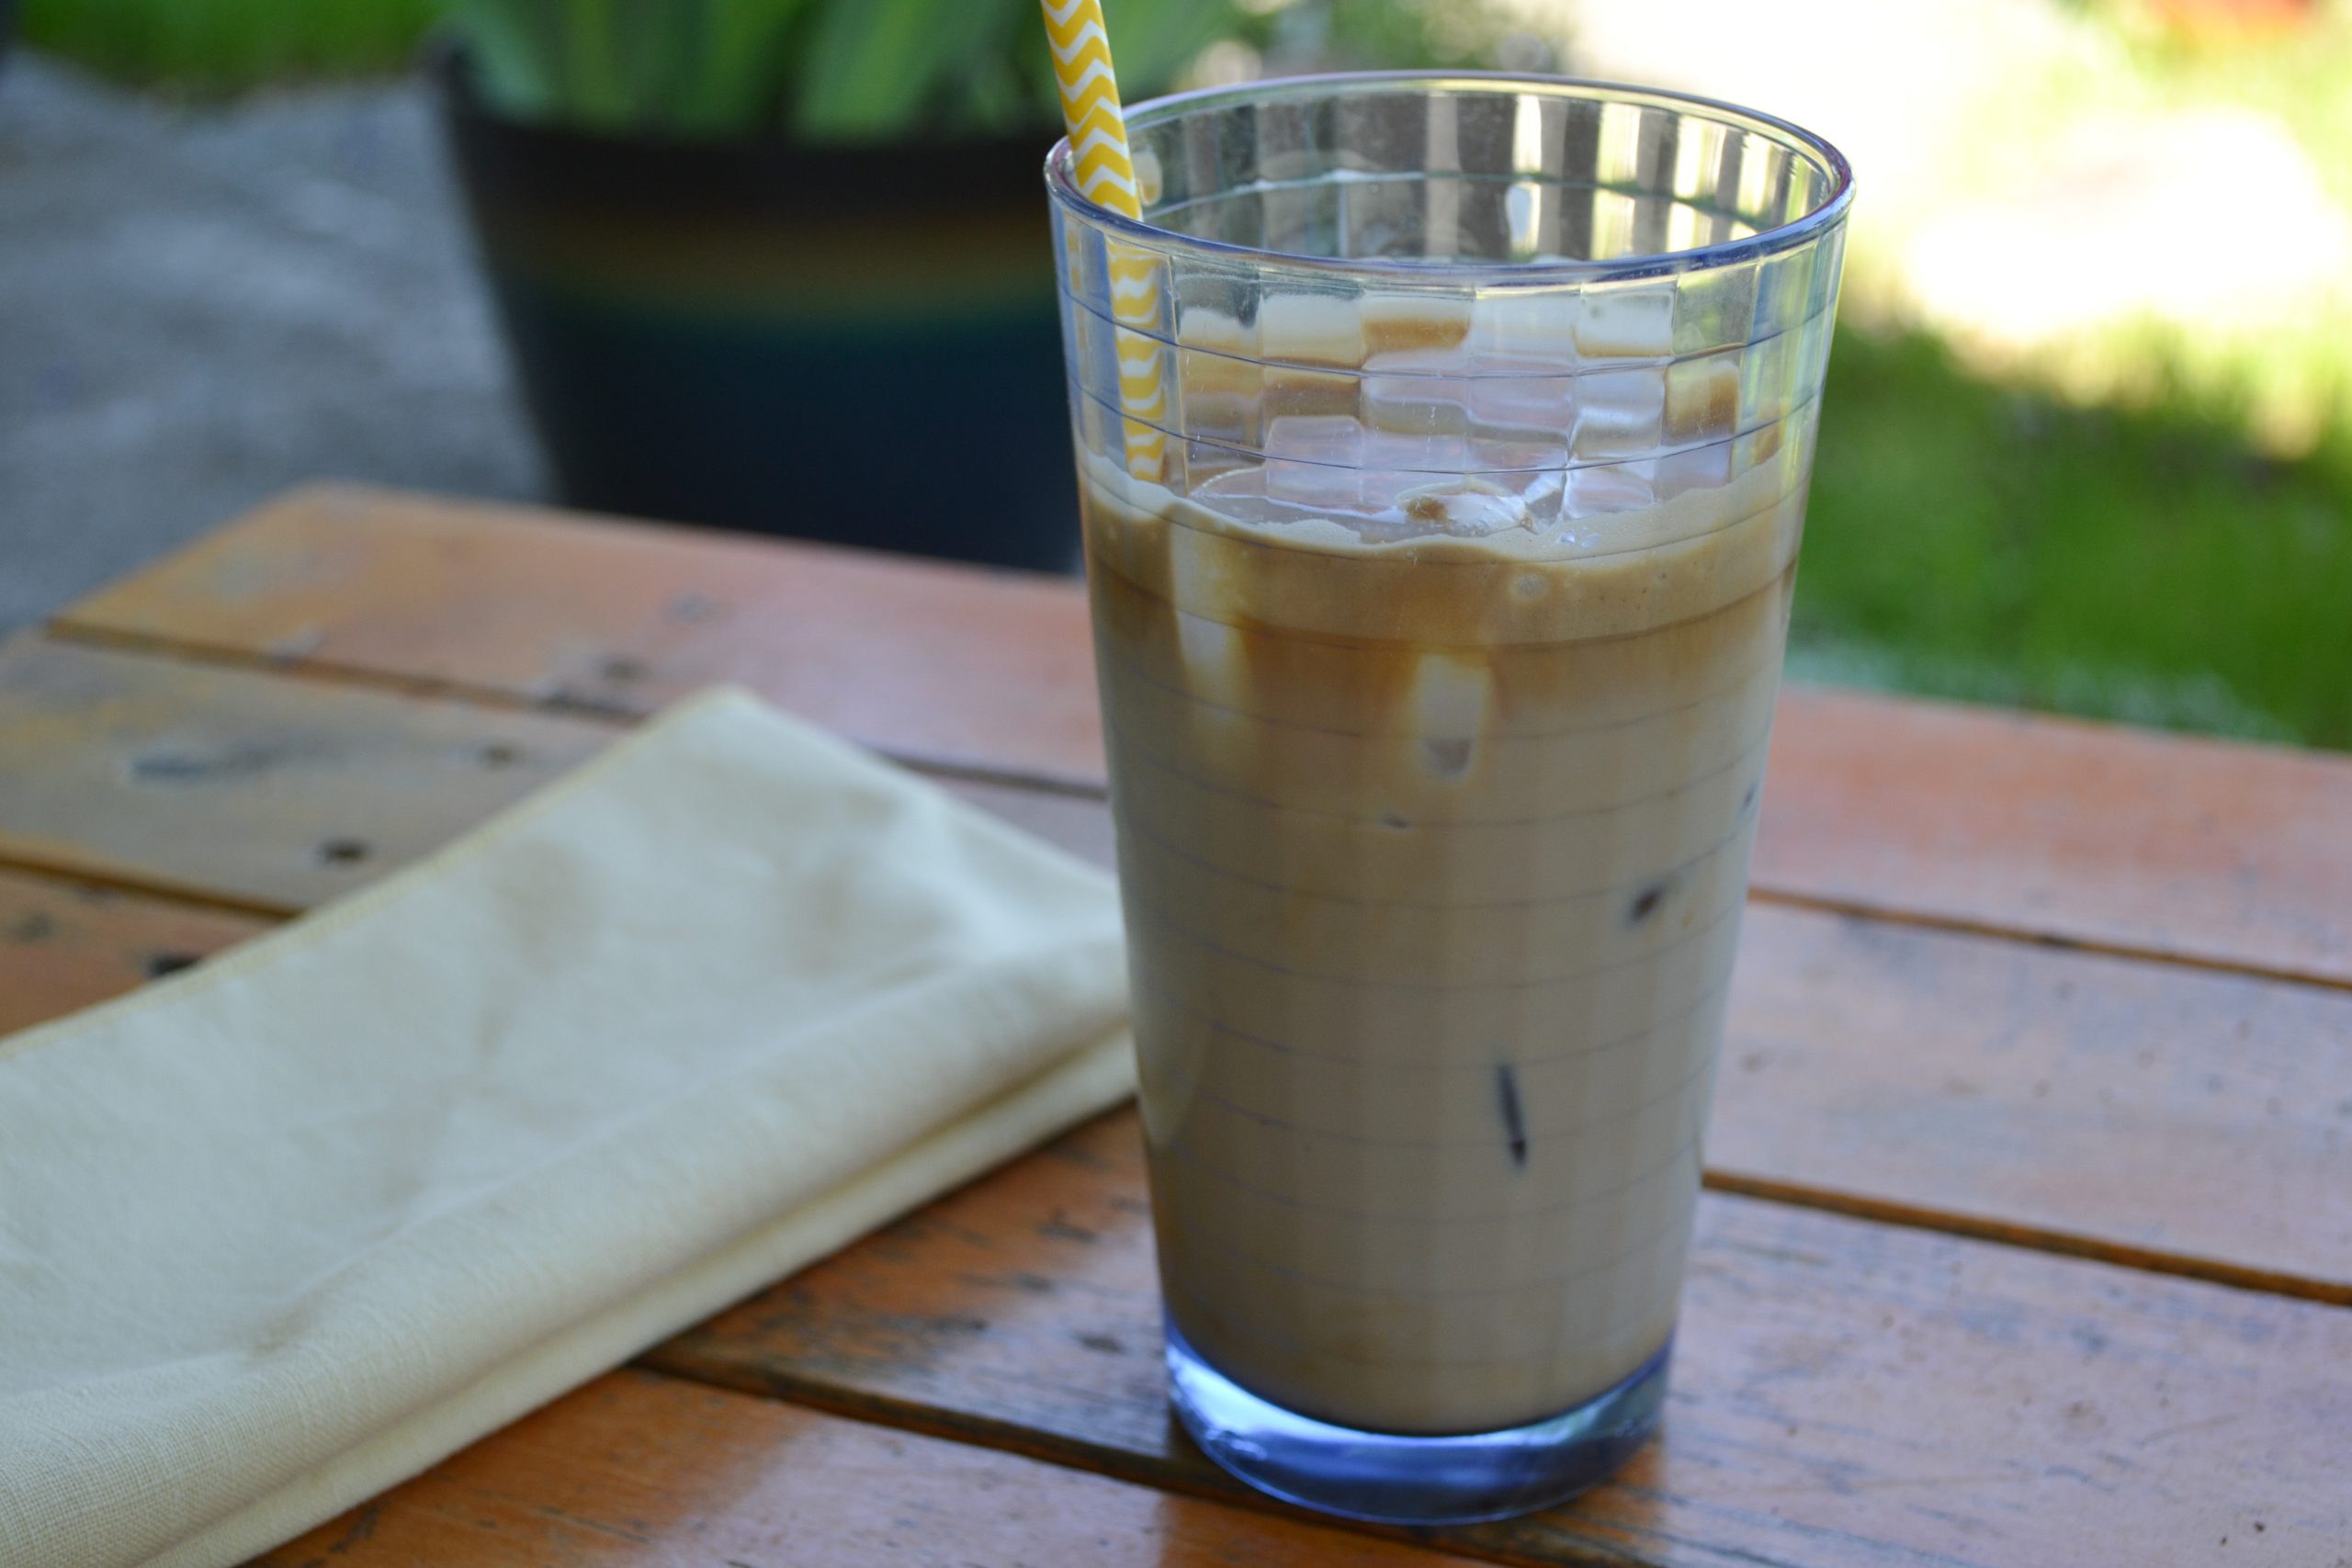 Have a little Greece at home with this recipe for a Greek Frappe. Taste amazing and very easy to make!!